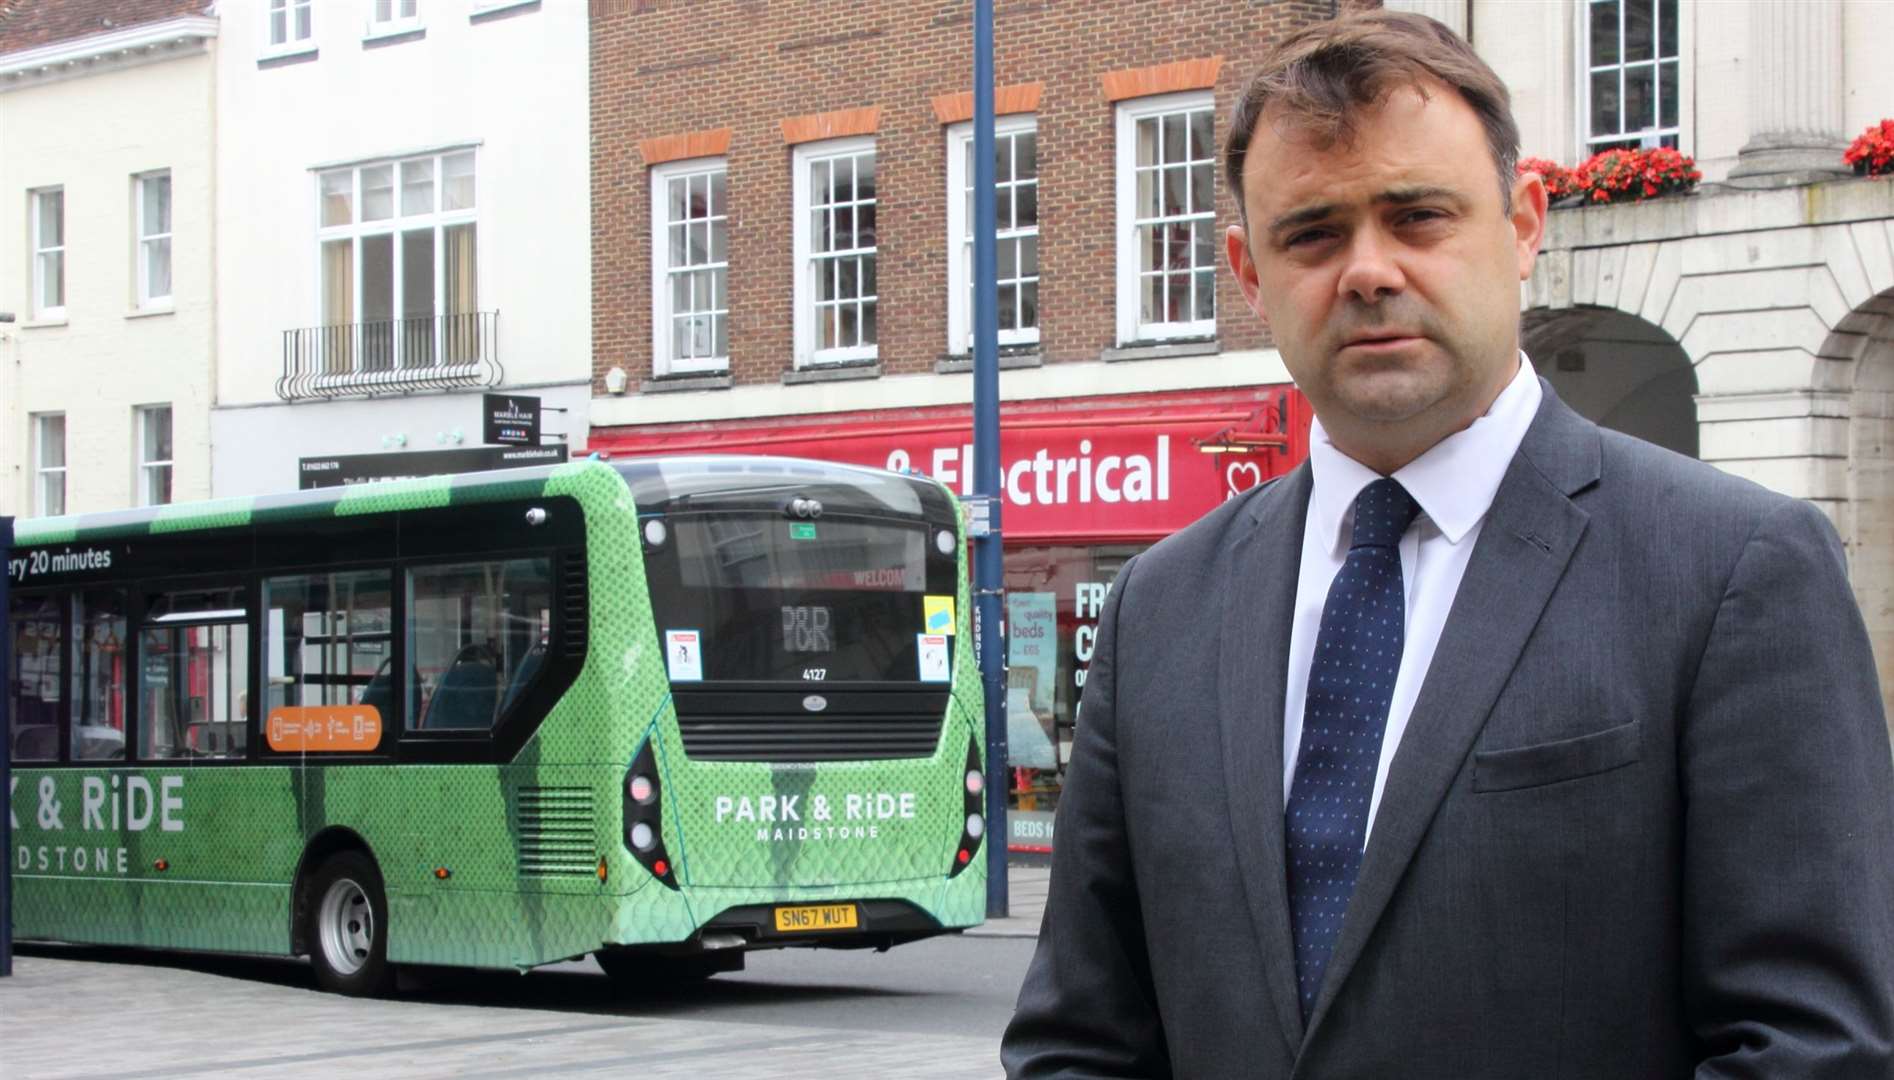 James Willis campaigns on transport and environmental issues and is involved with the new group